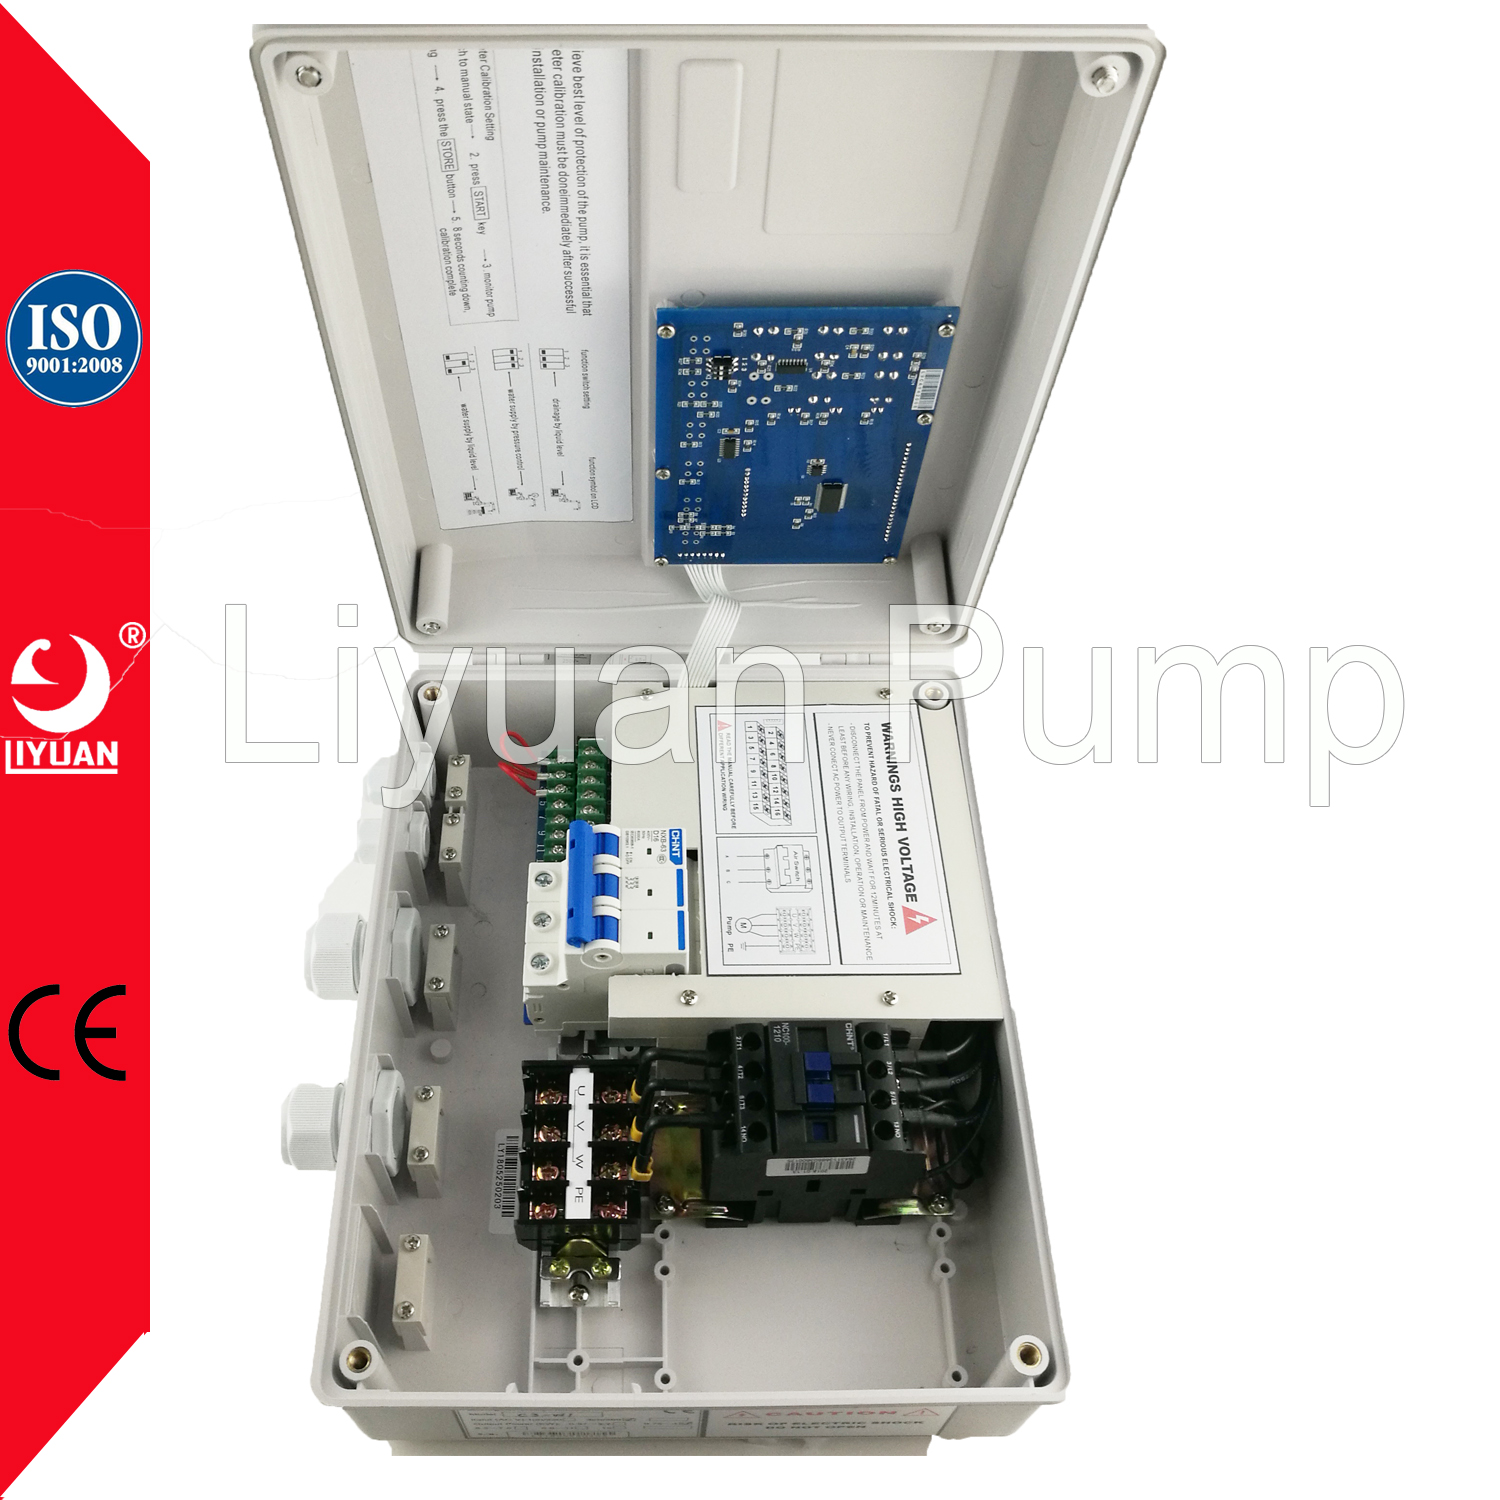 MPPT Charge Controller, Solar Pumping System